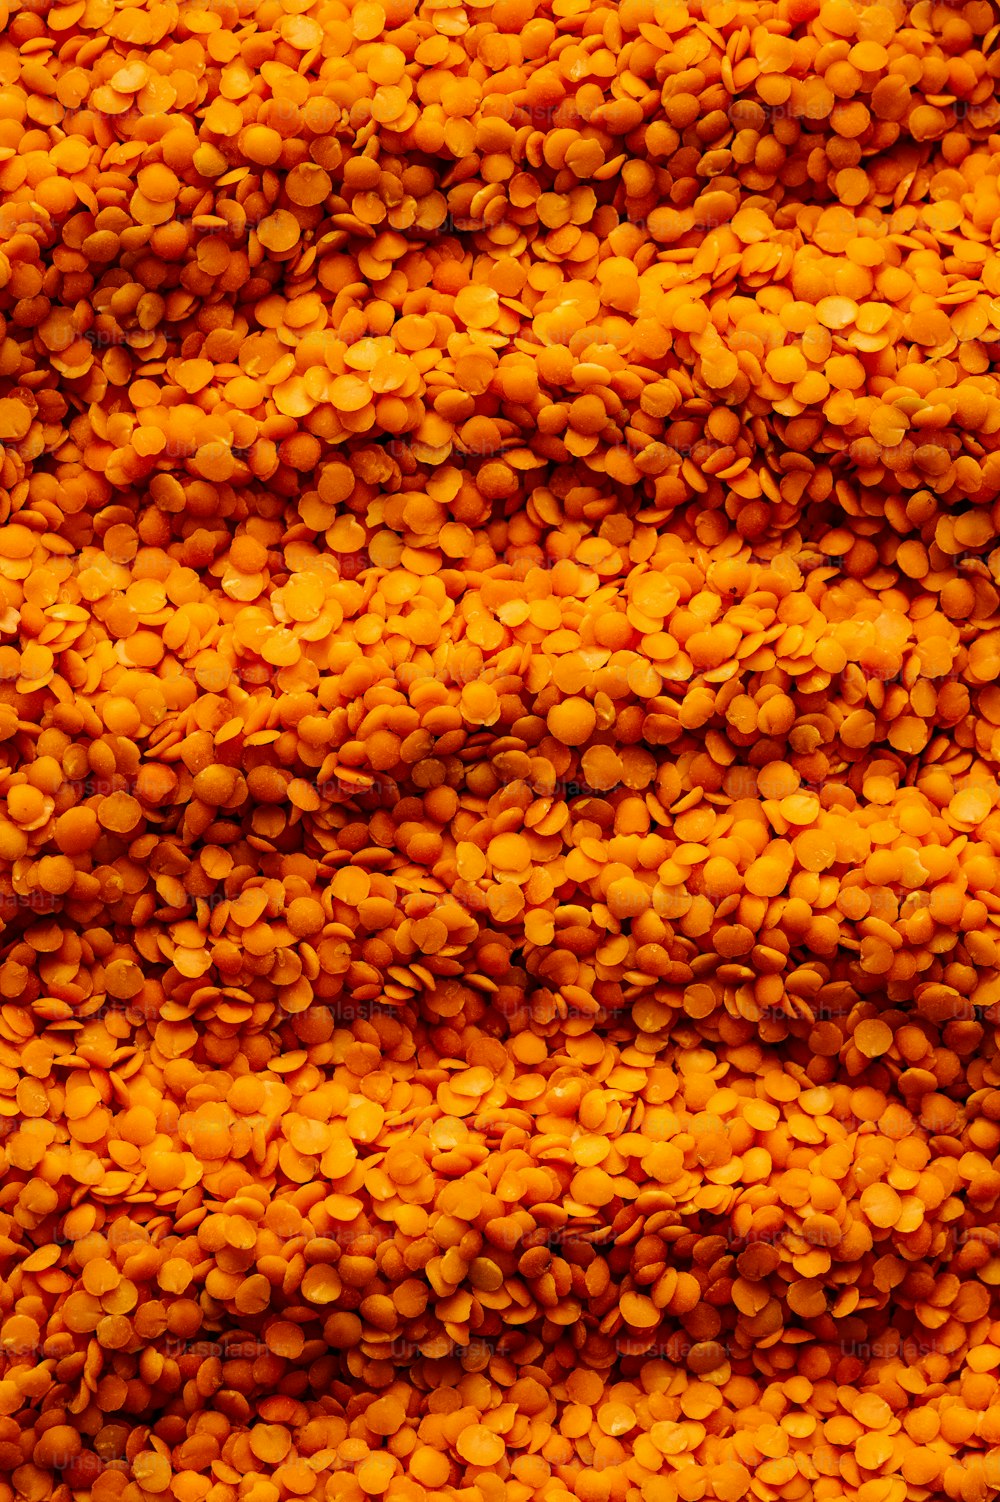 a close up view of a bunch of small yellow objects